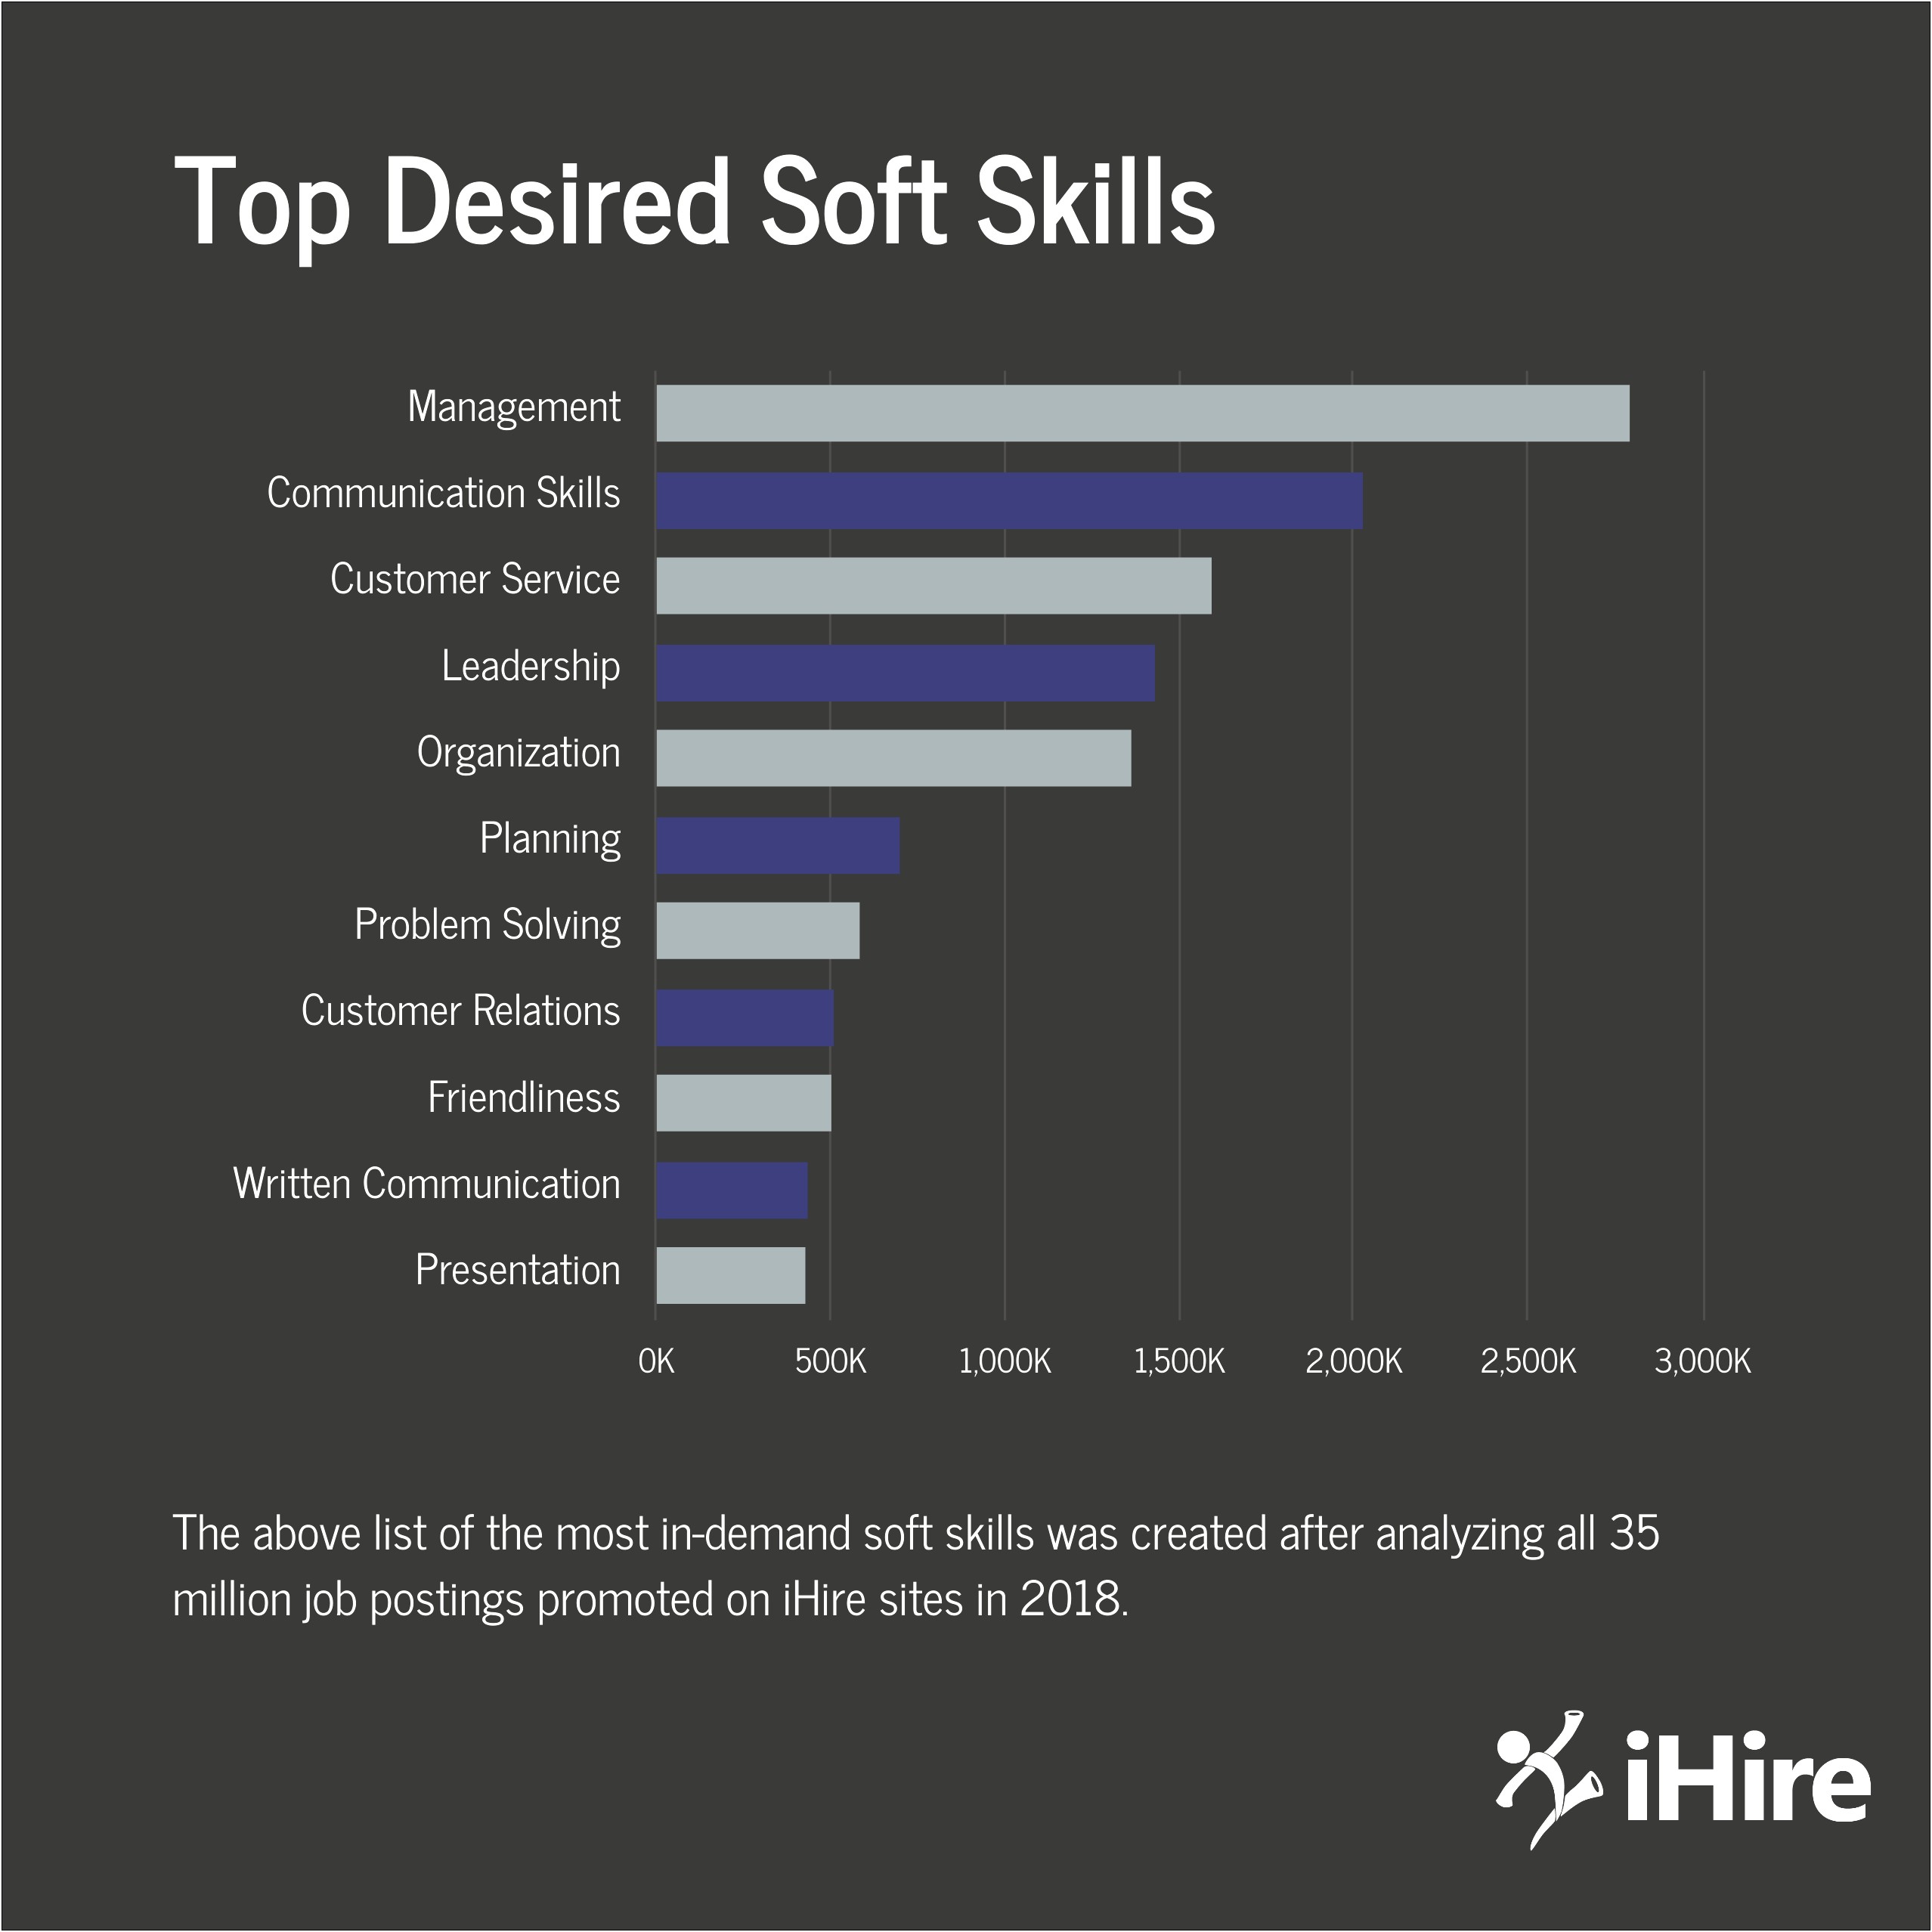 Customer Service Skills To Highlight On Your Resume